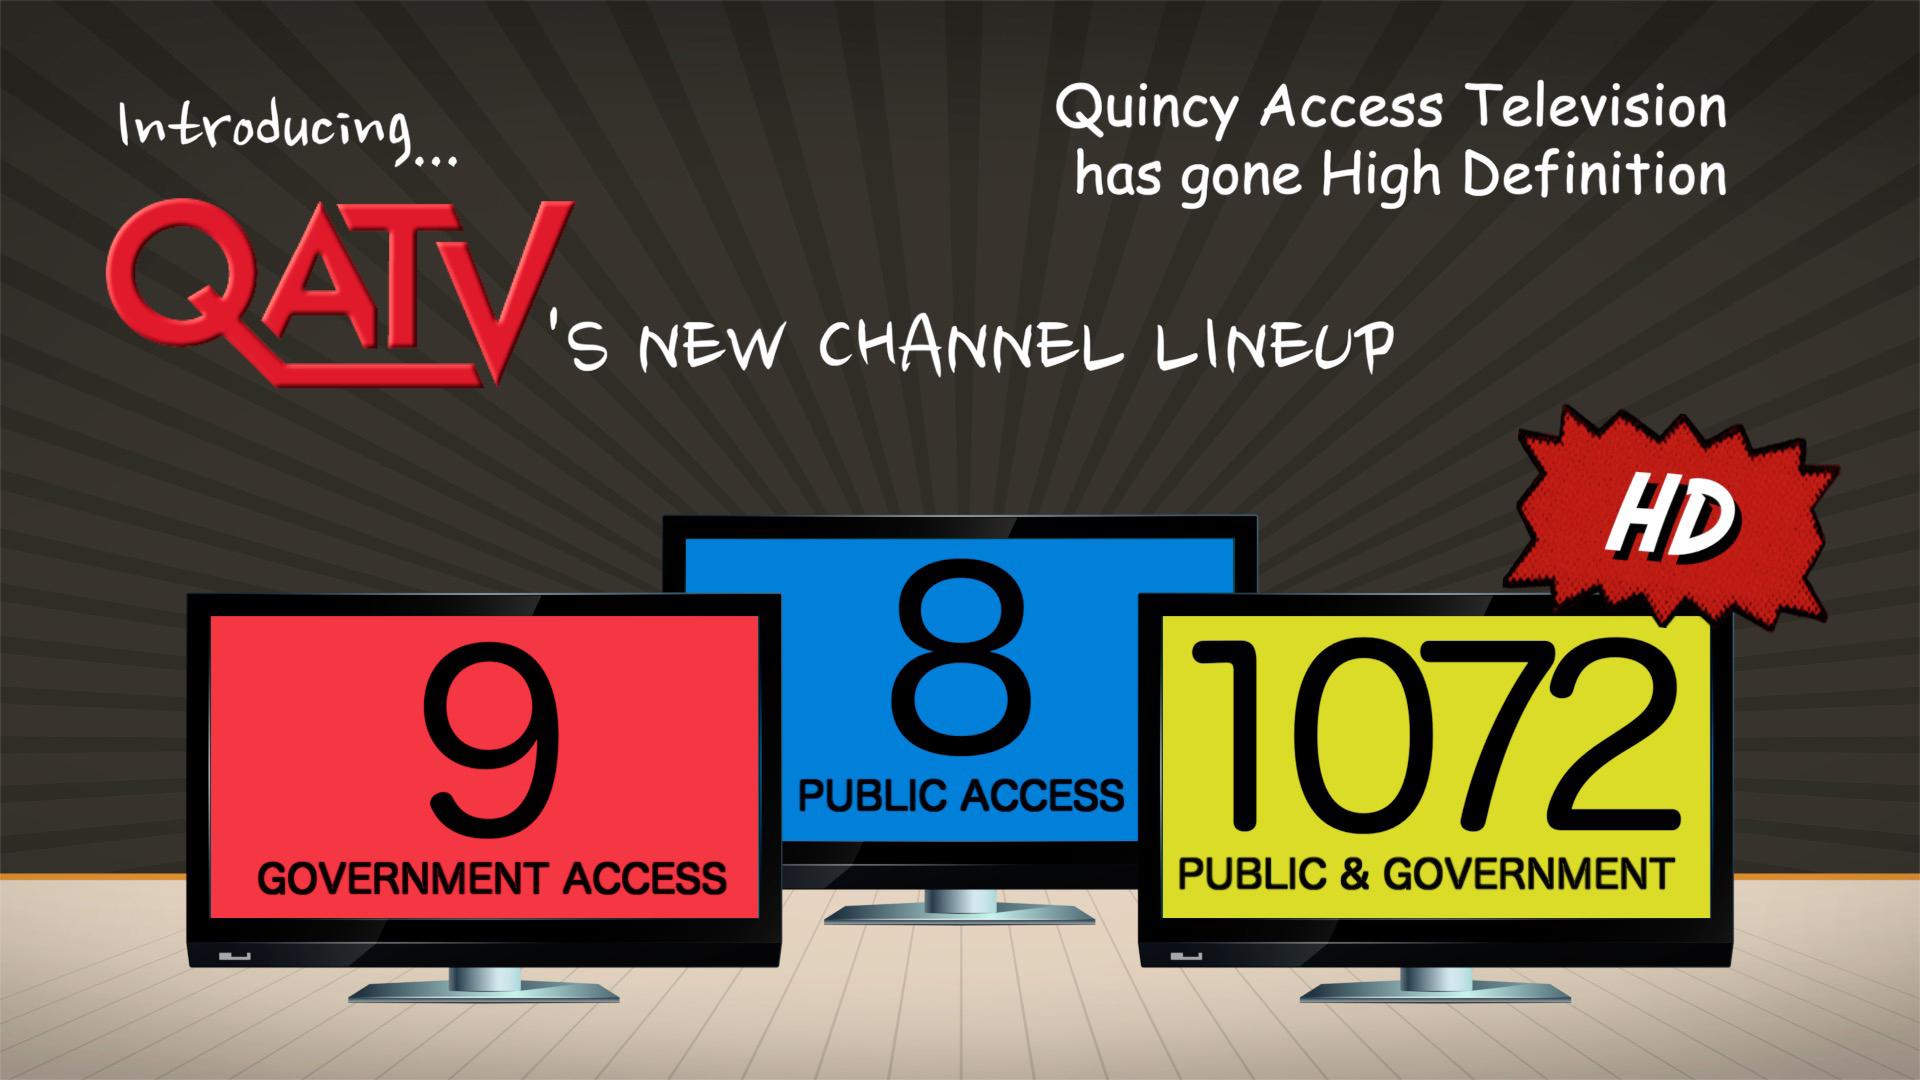 HD Channel Added to QATV's Lineup